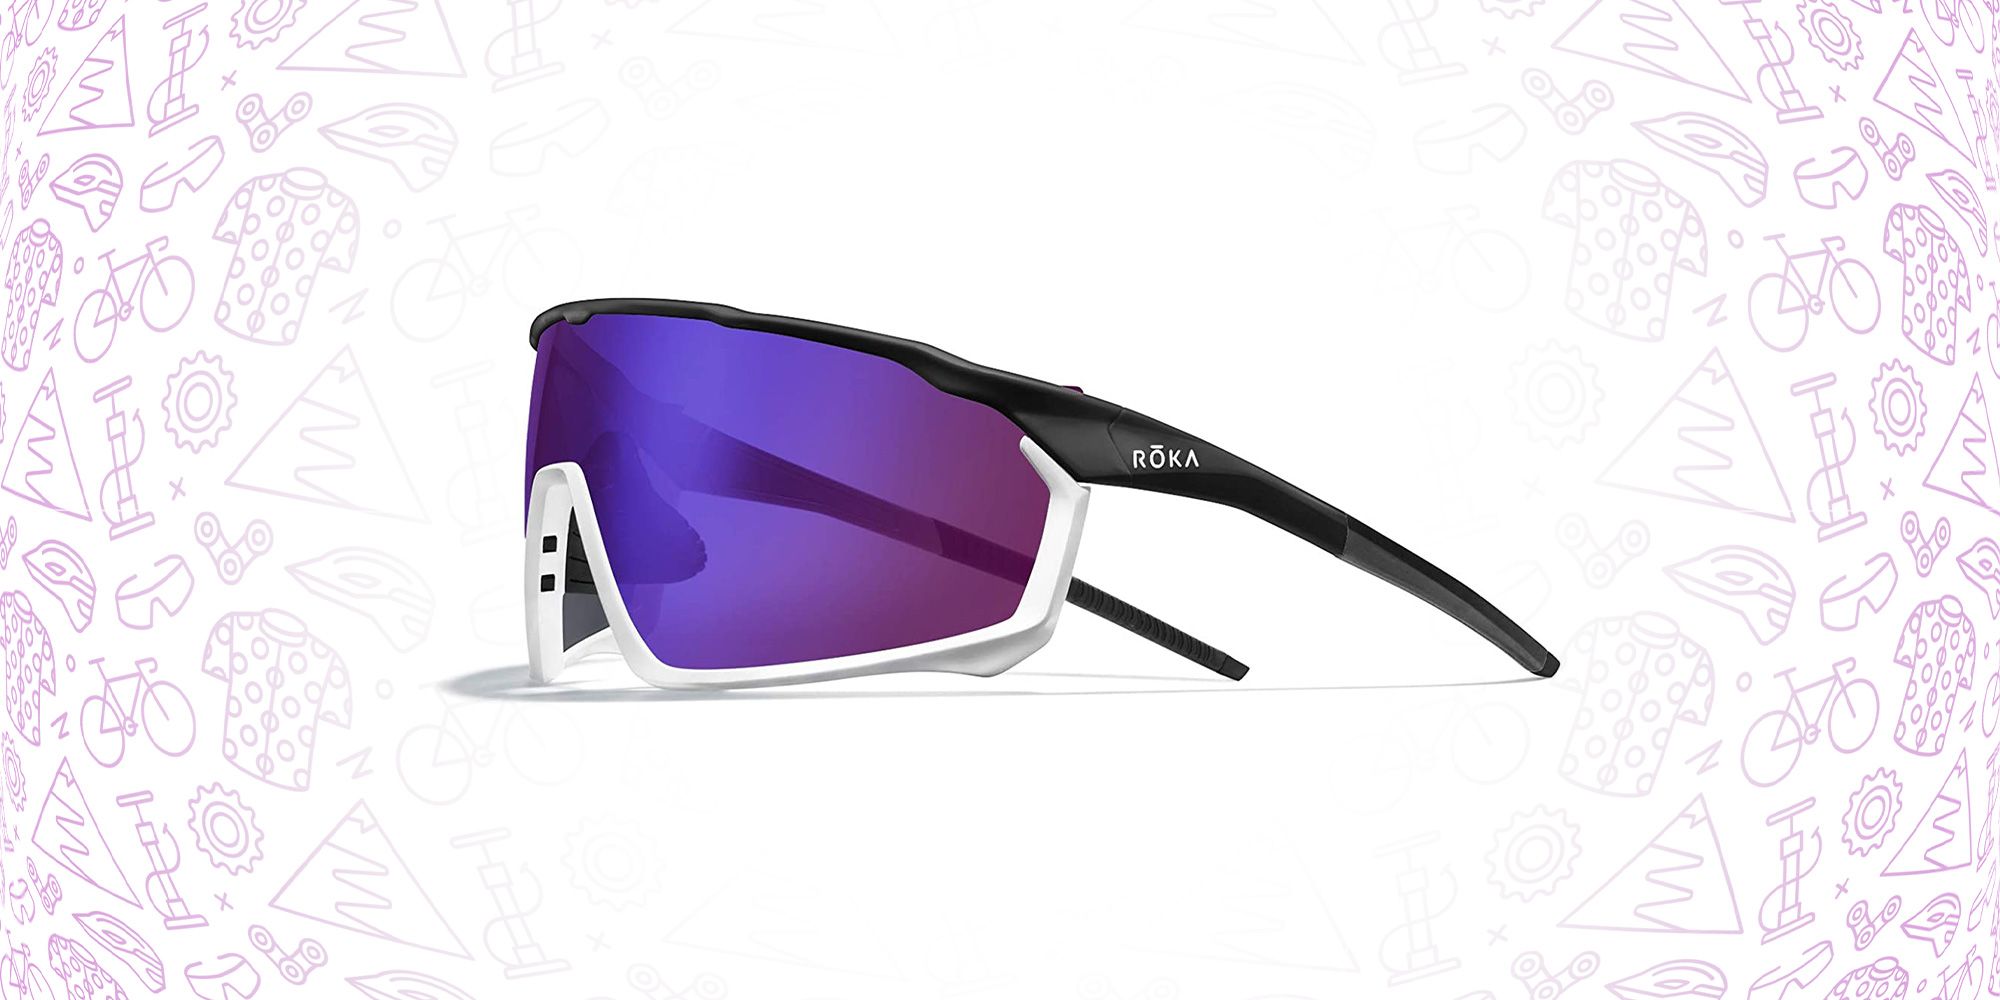 Best Sunglasses for Cyclists 2022